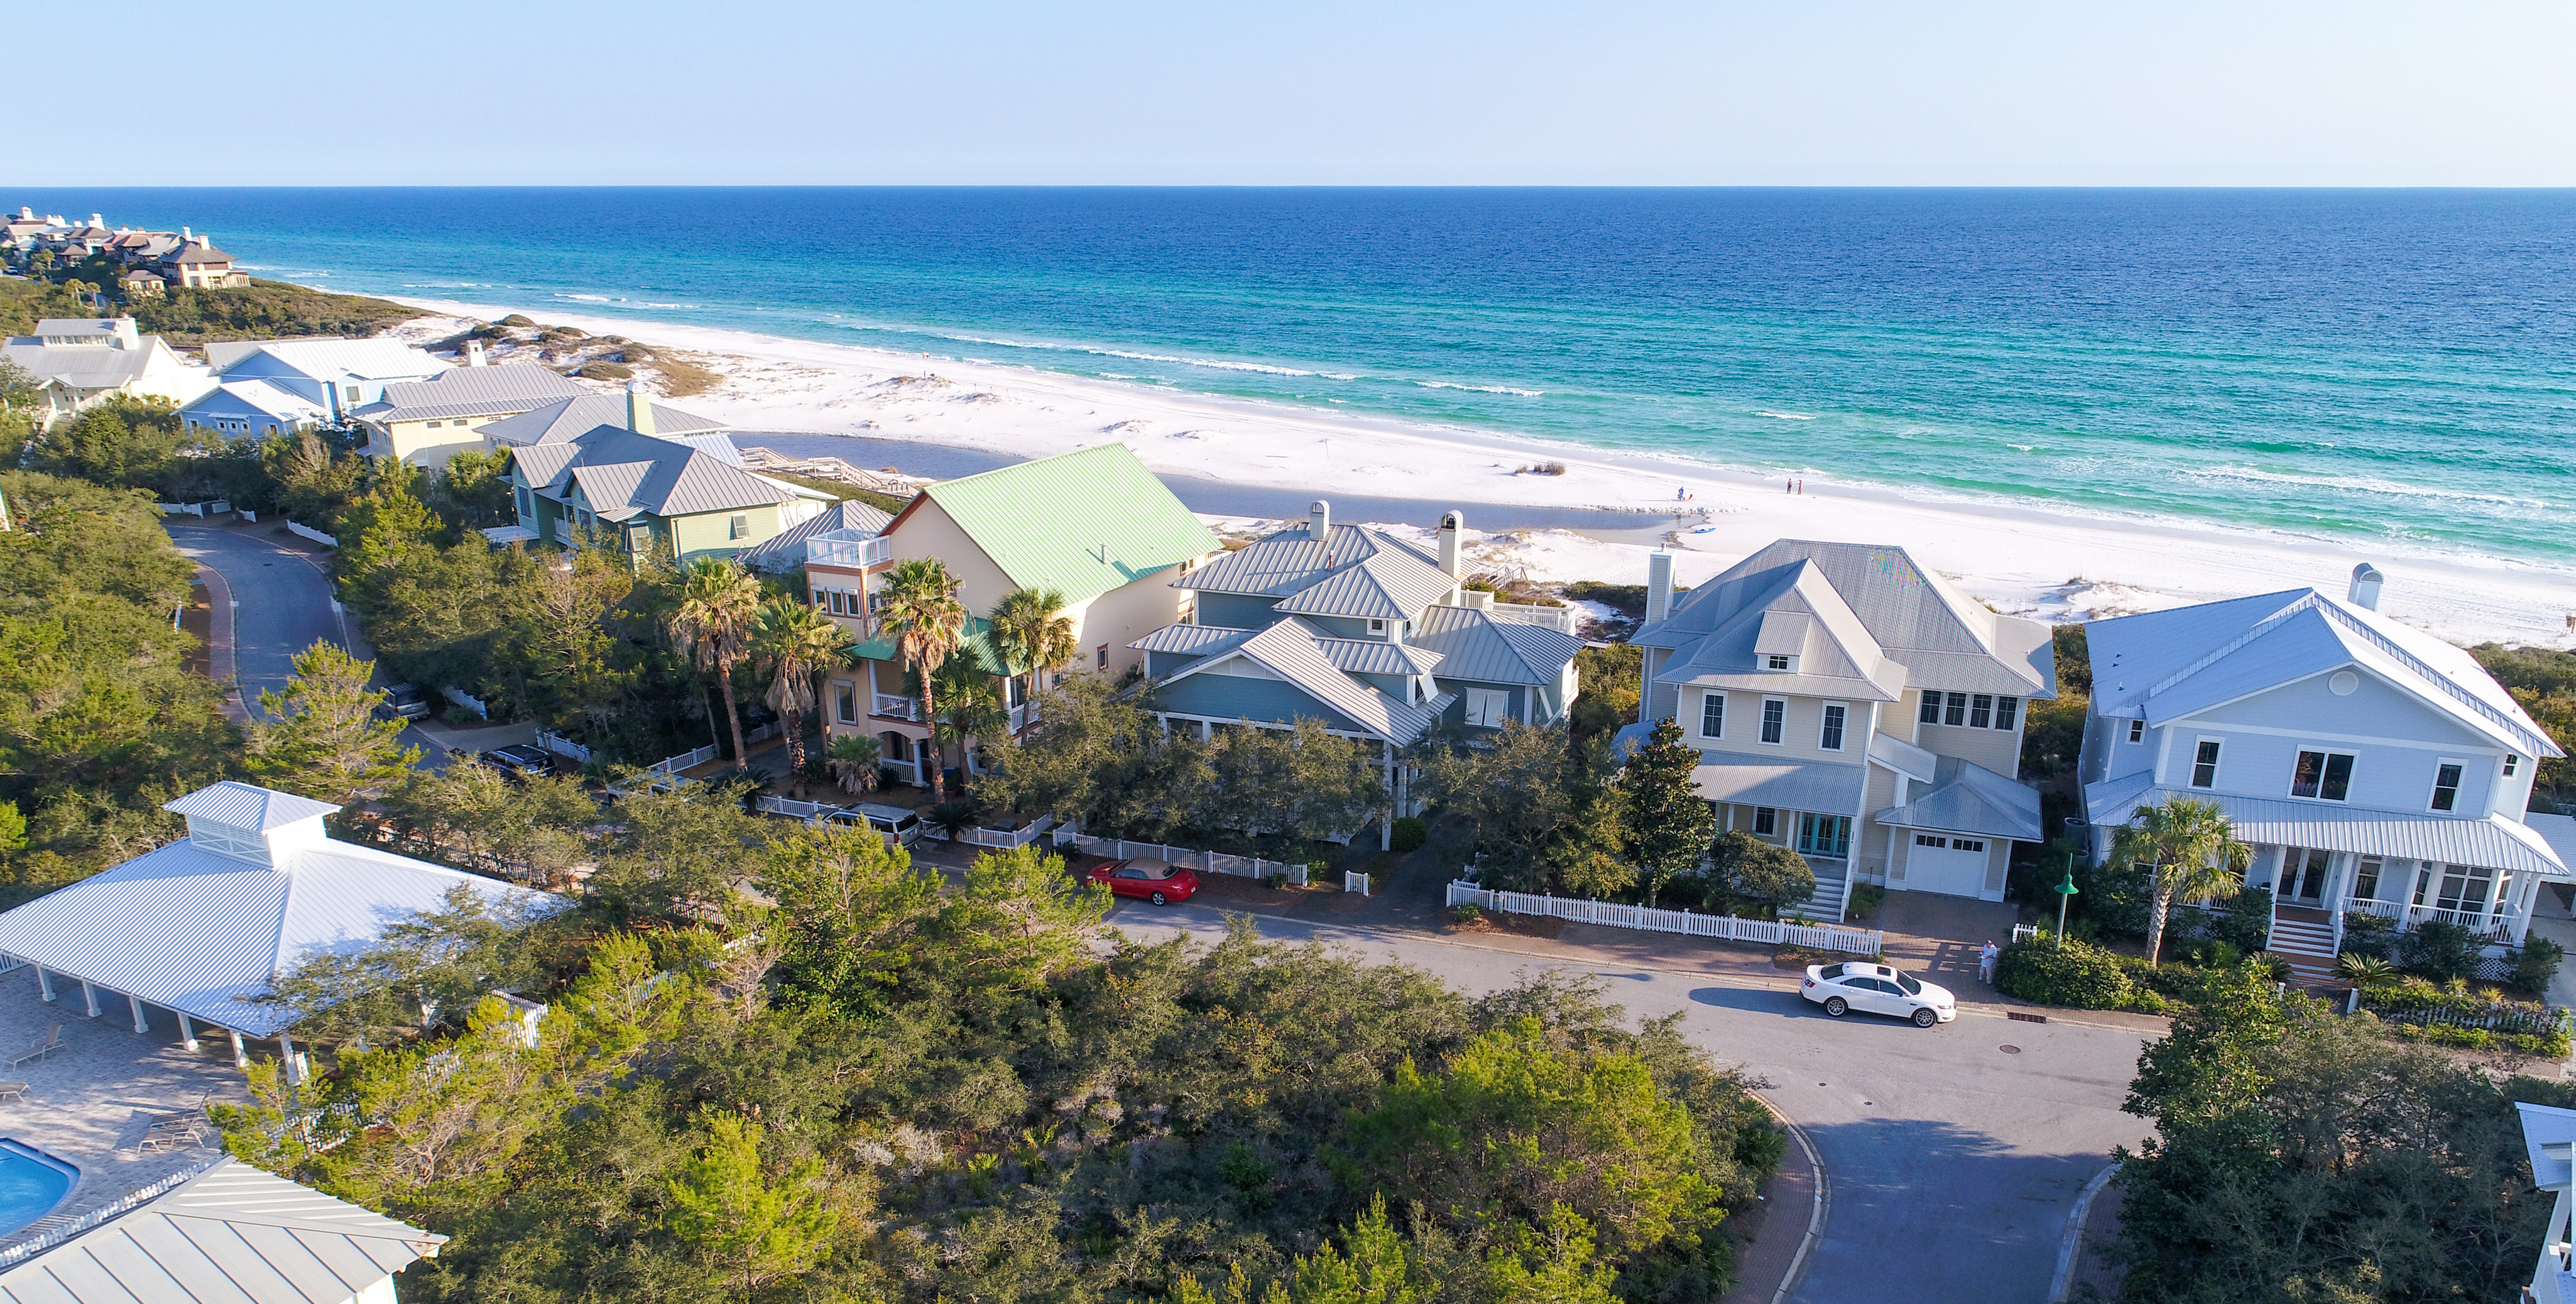 An aerial view of some of the Gulf front homes in Old Florida Beach with the gulf in the background